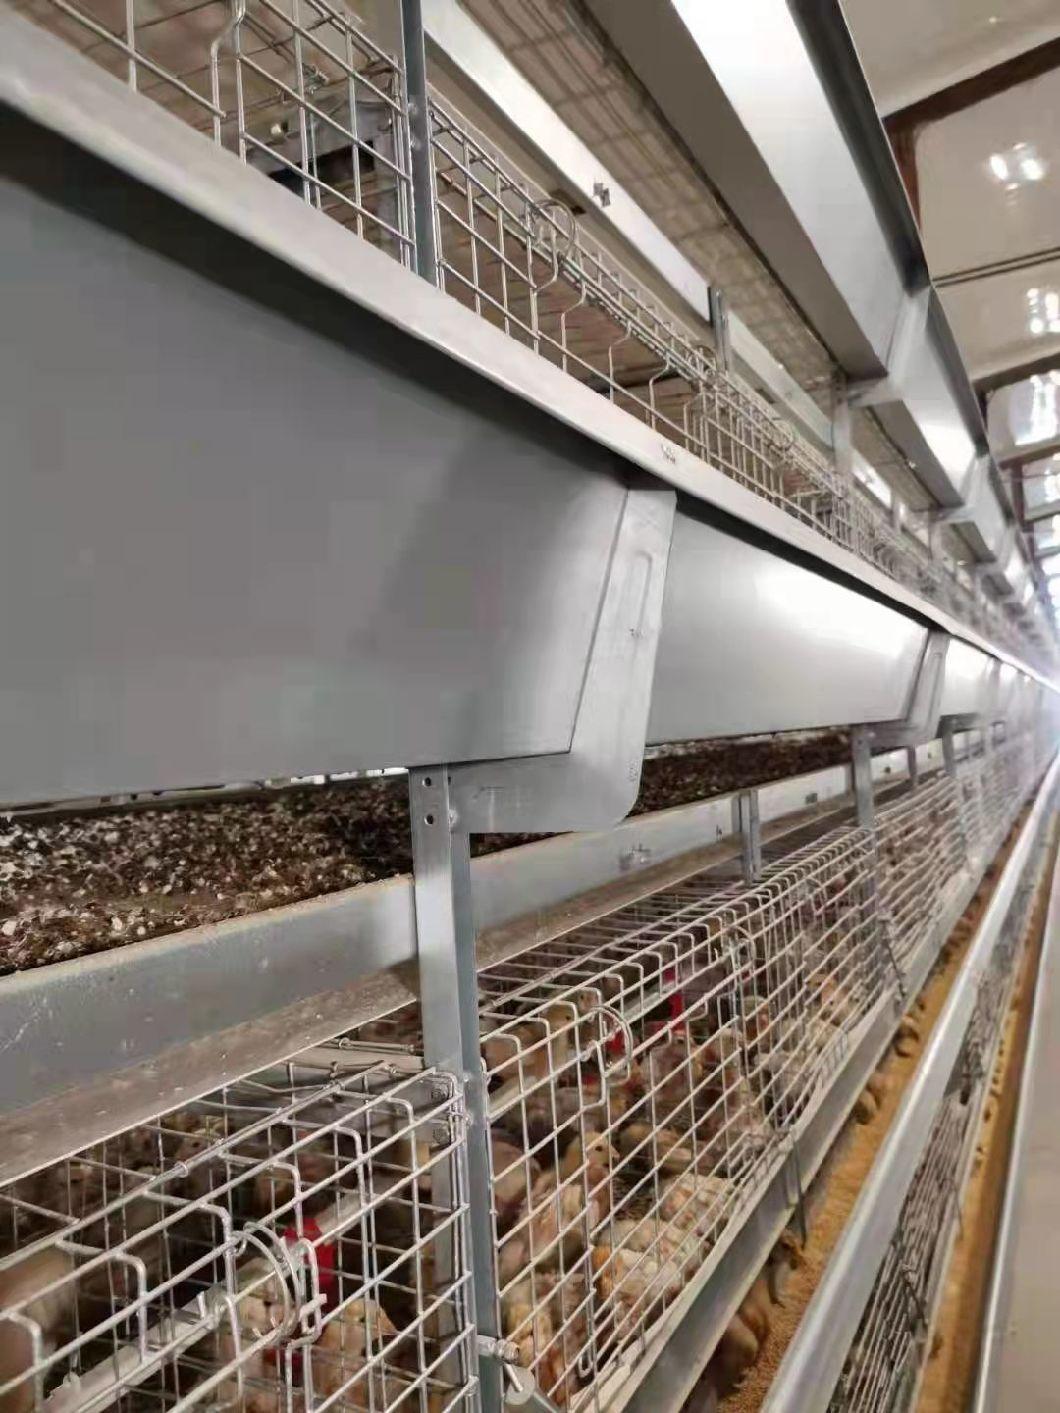 Battery Layer Chicken Cage Farm Poultry Farming Floor Equipment for Sale